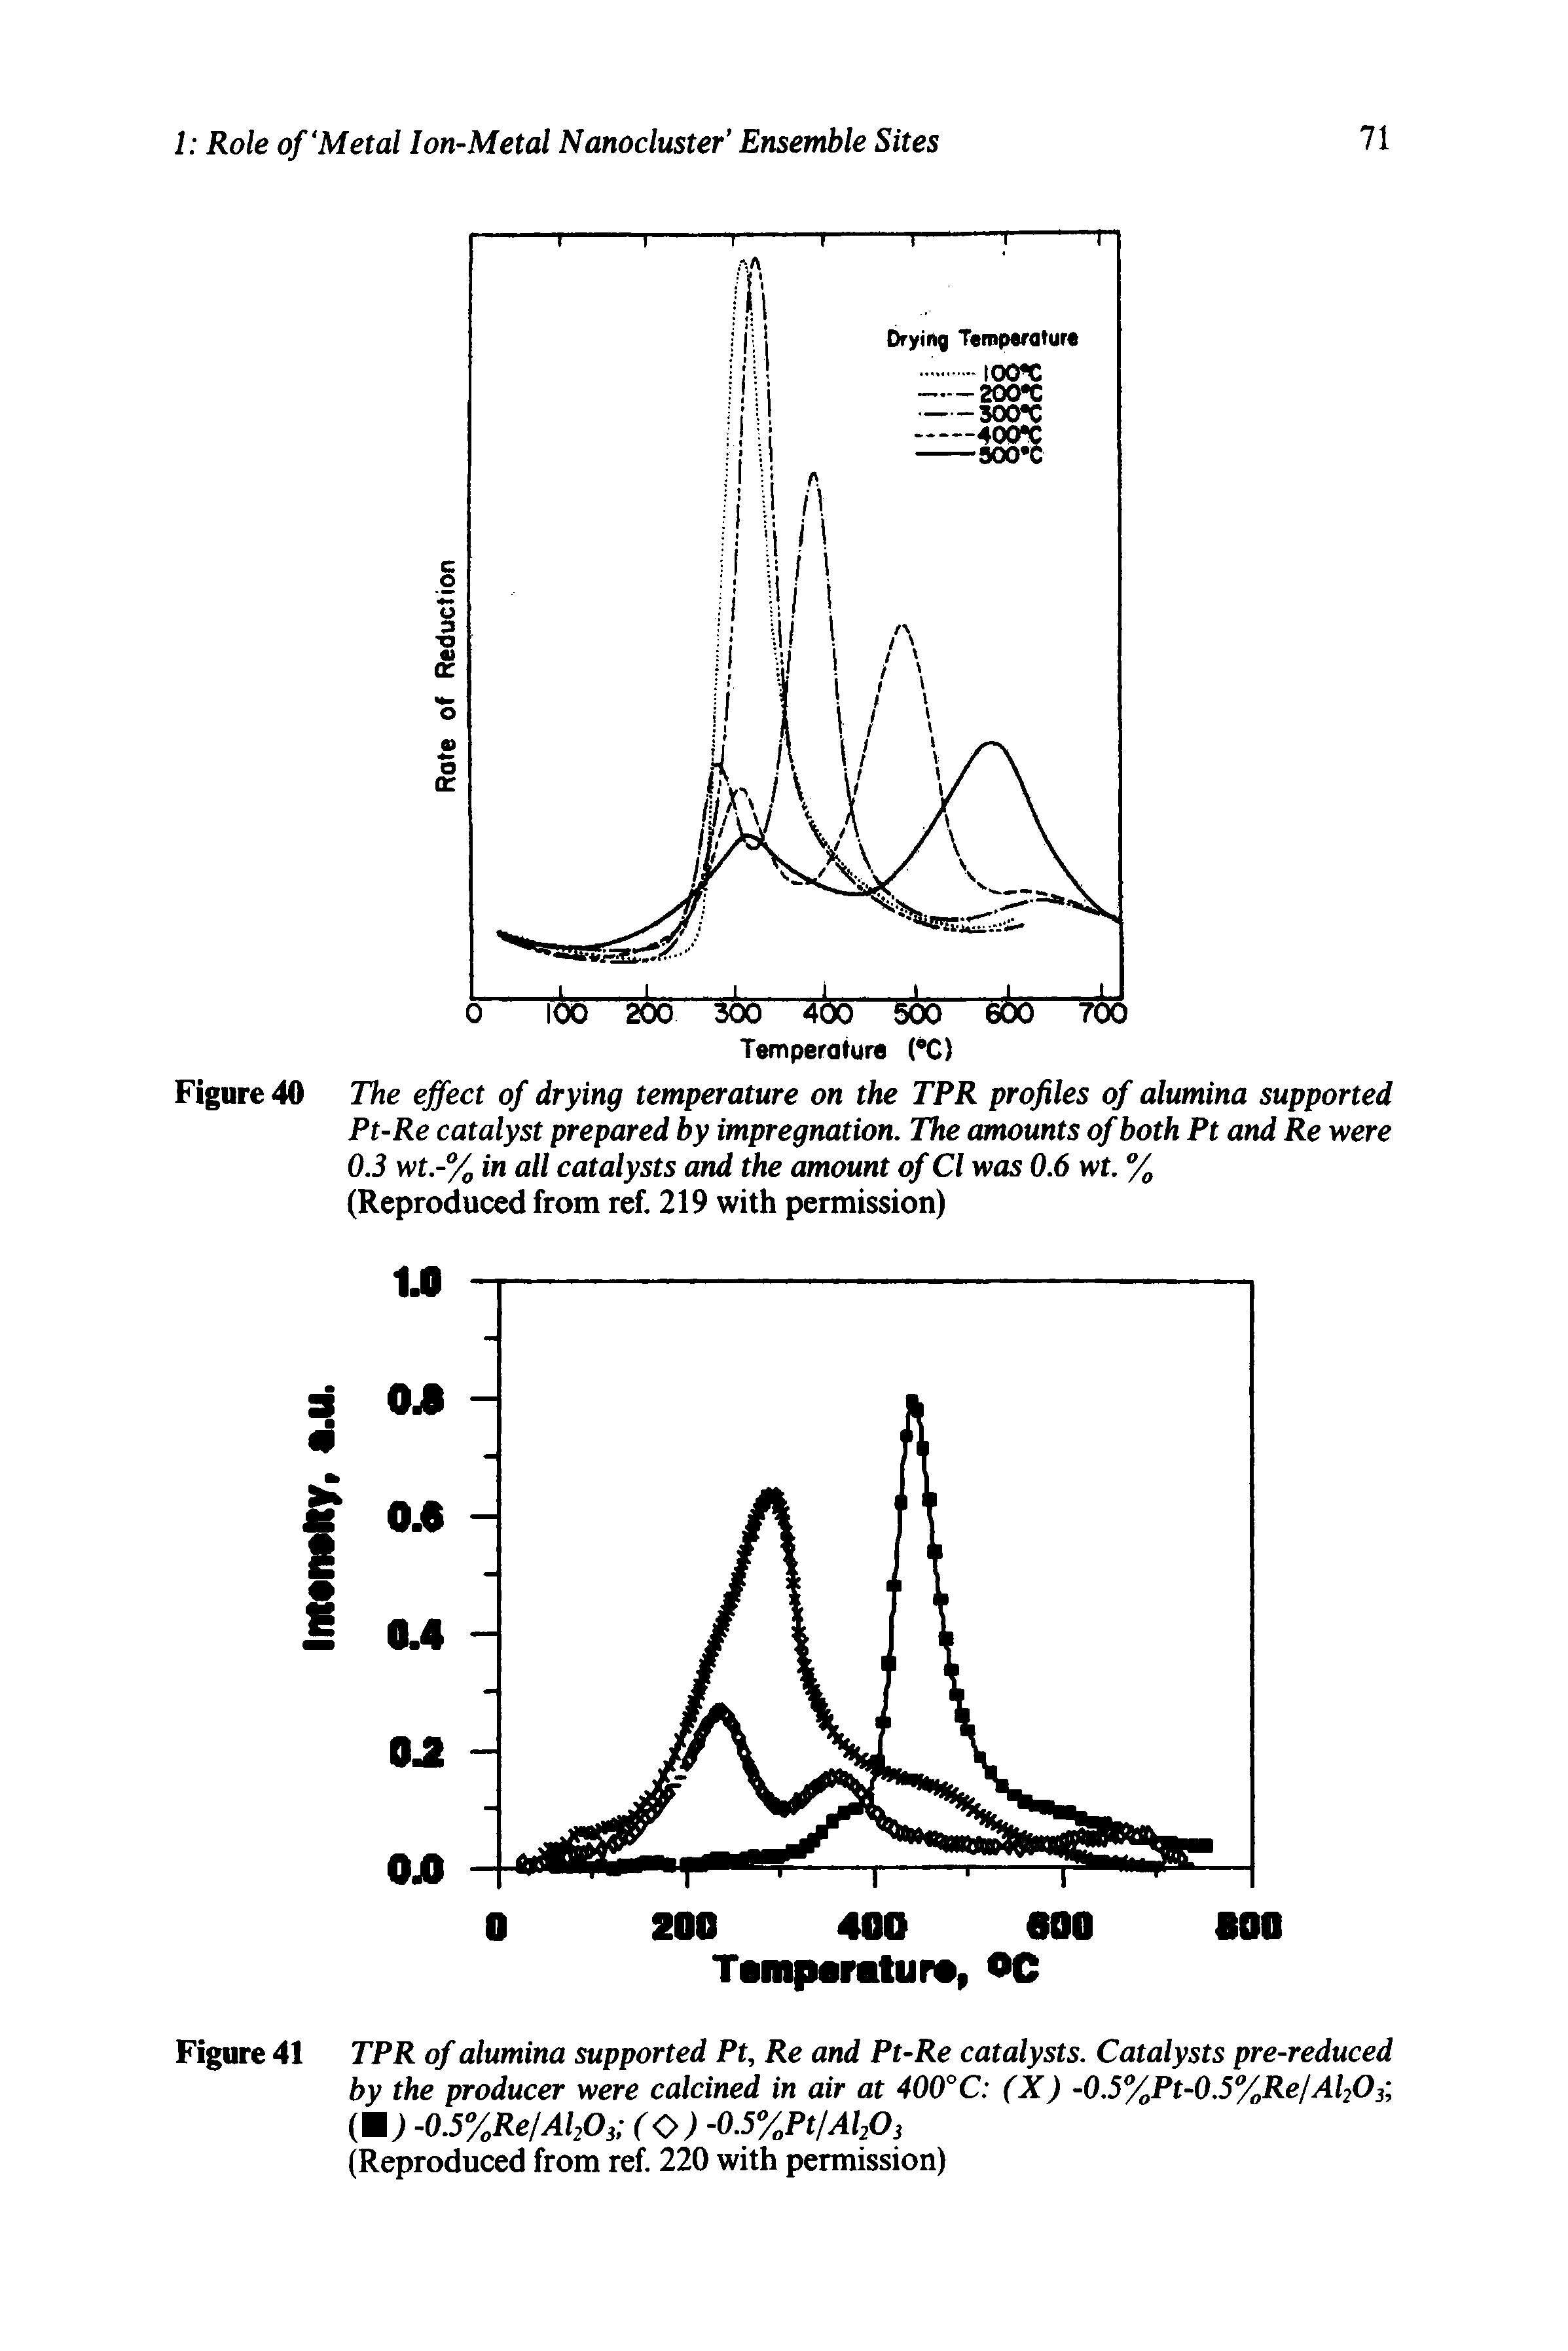 Figure 40 The effect of drying temperature on the TPR profiles of alumina supported Pt-Re catalyst prepared by impregnation. The amounts of both Pt and Re were 0.3 wt.-% in all catalysts and the amount of Cl was 0.6 wt. %...